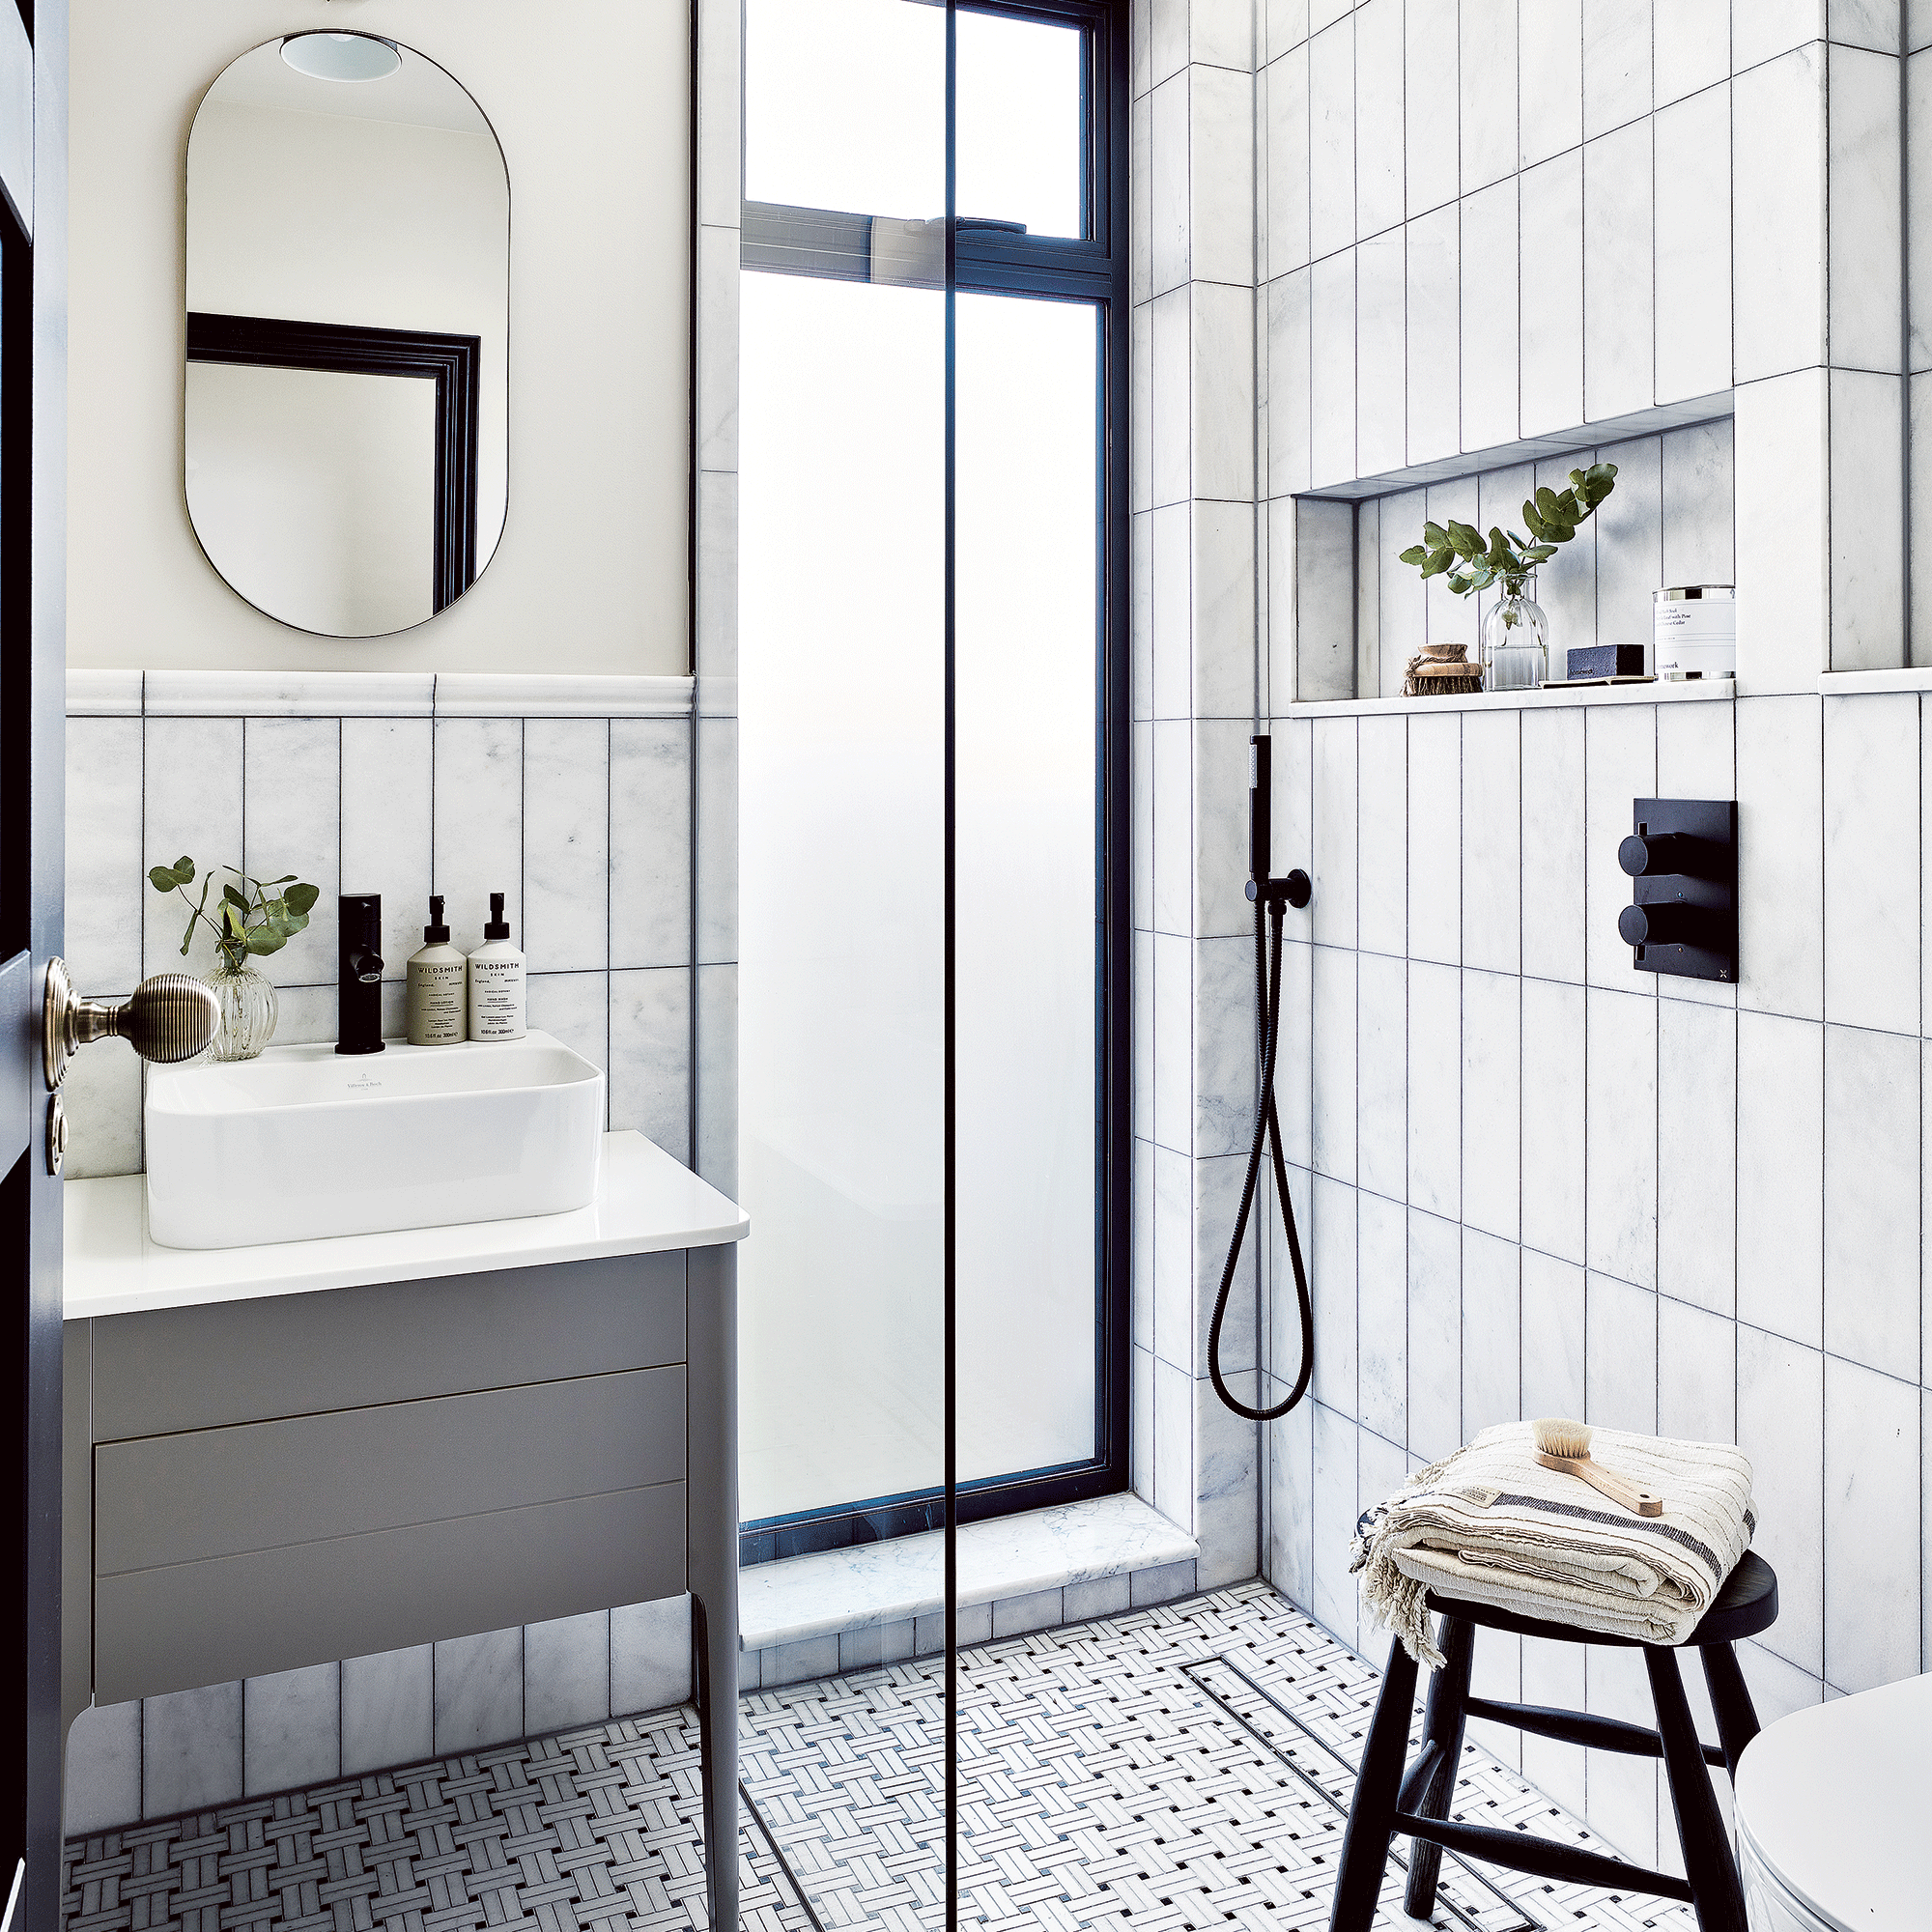 Bathroom with white tiles and grey vanity